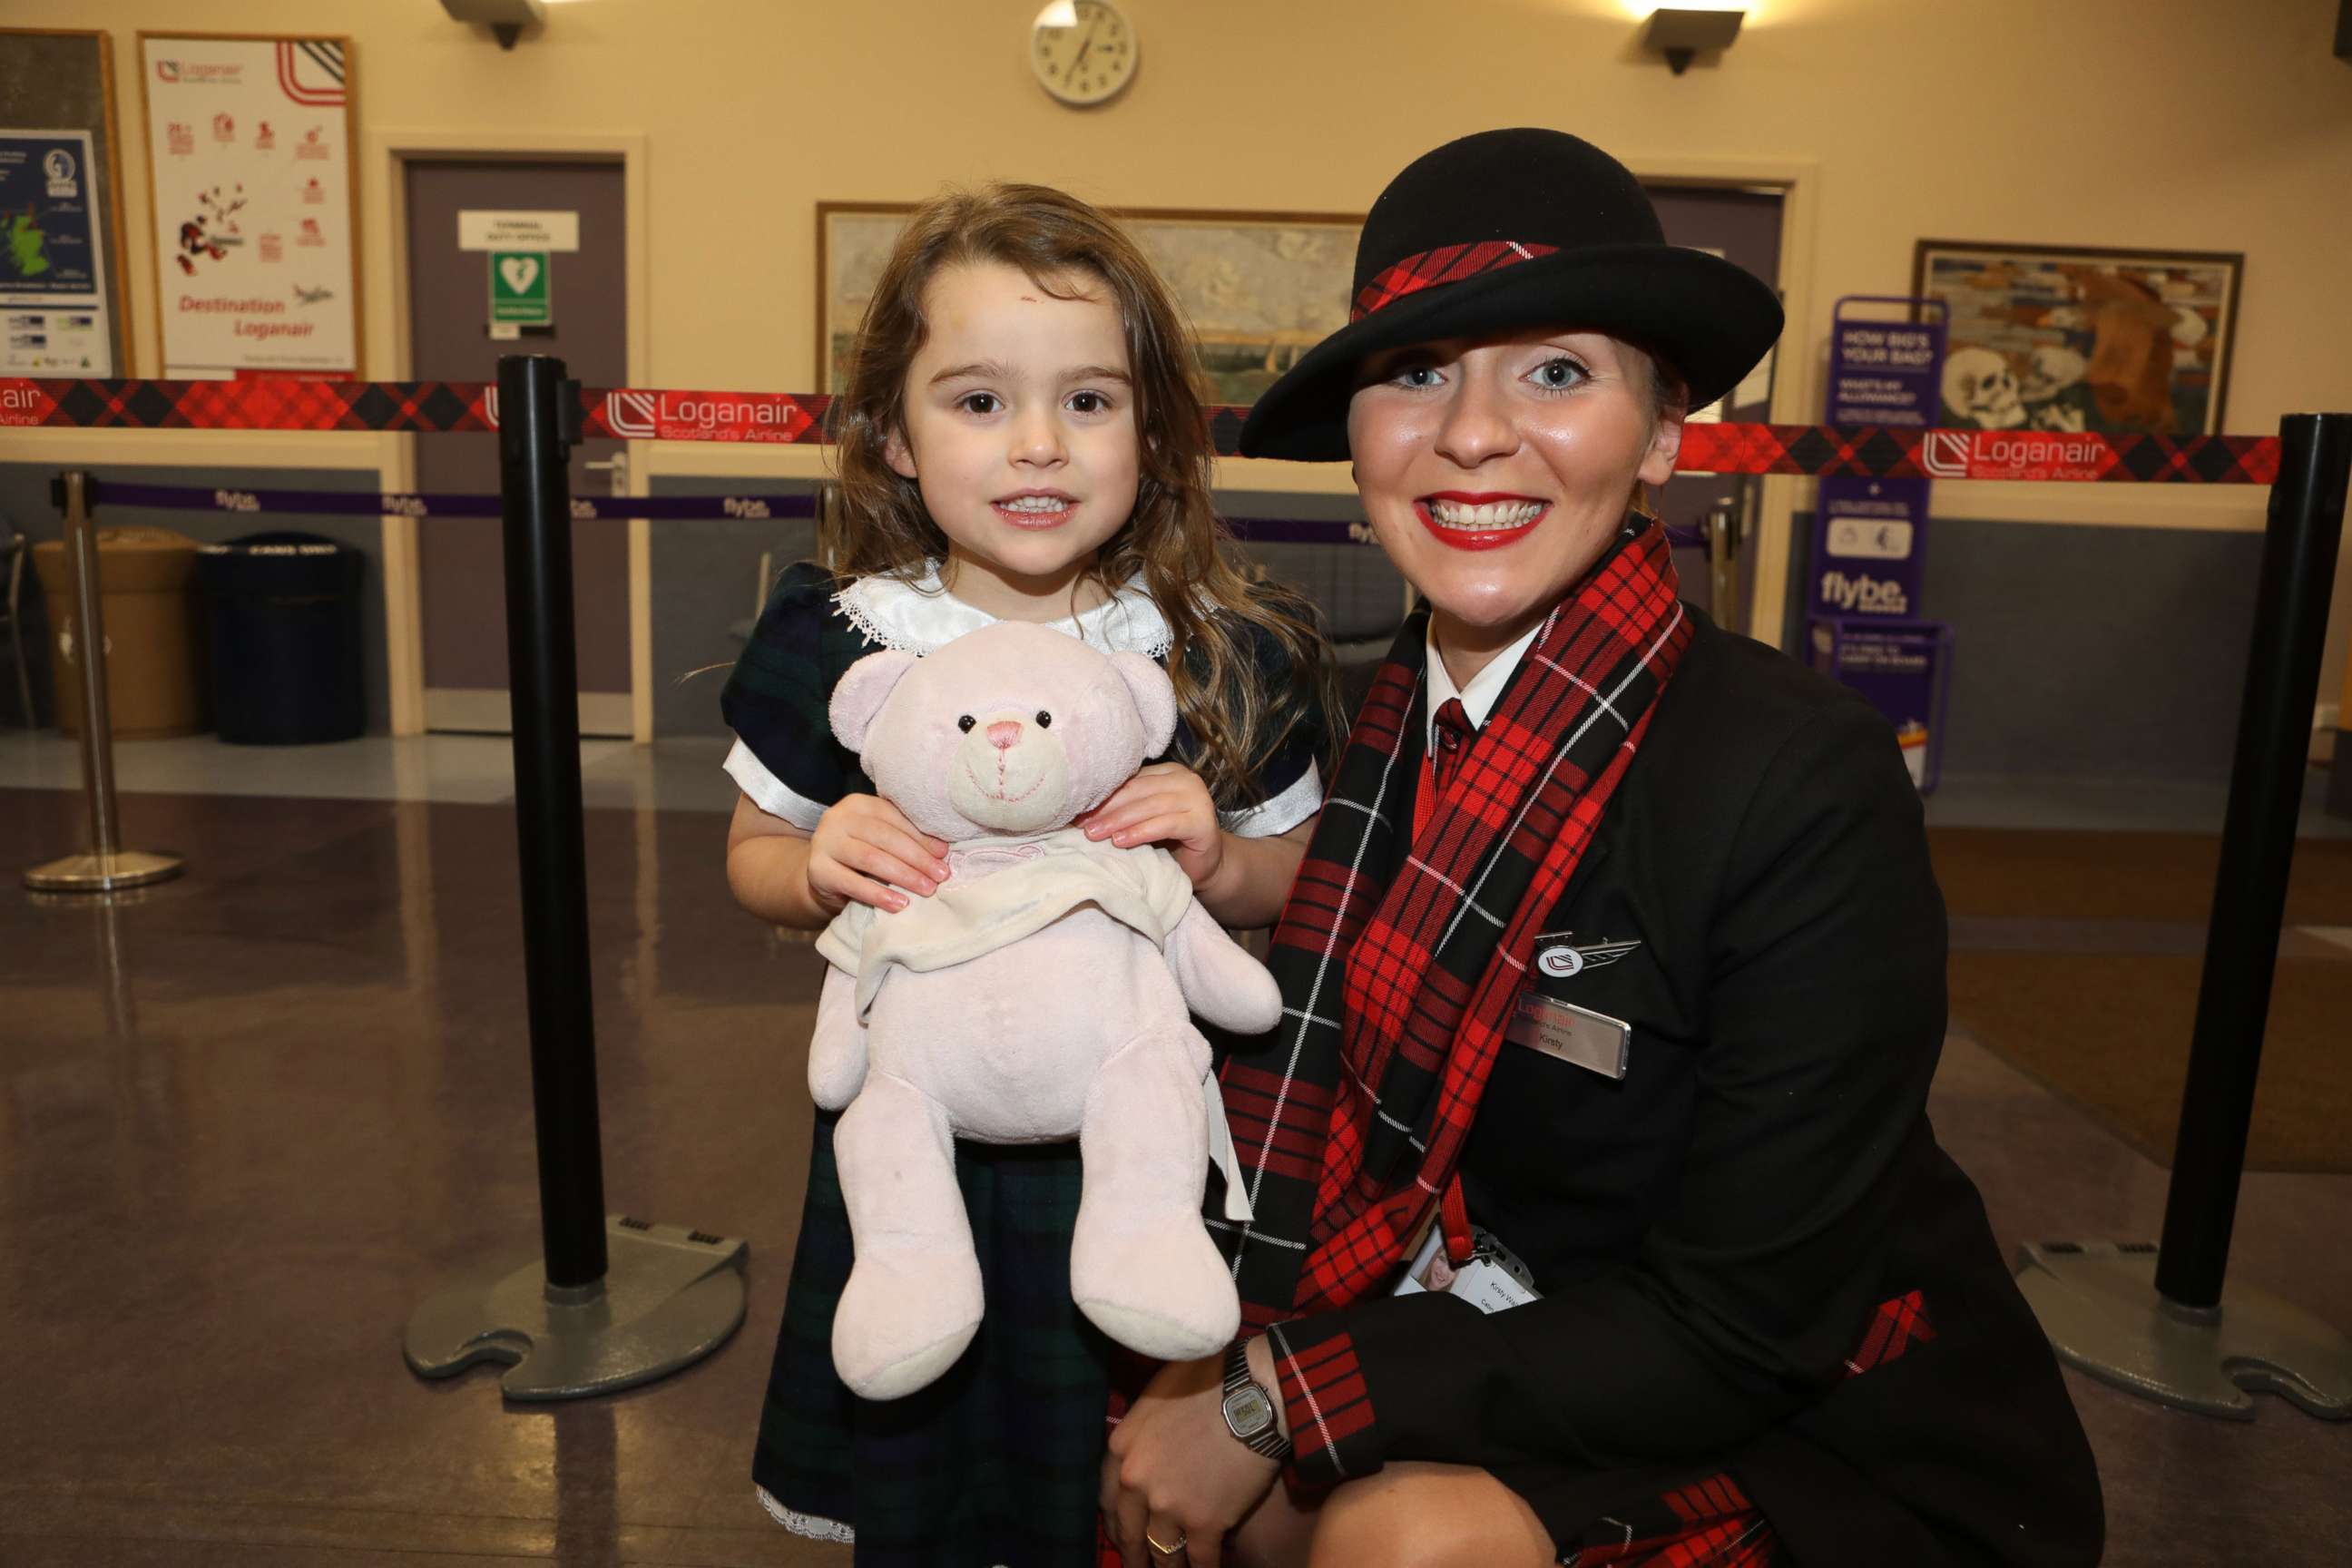 PHOTO: 4-year-old Summer, whose last name was asked to be withheld, with Loganair cabin crew member Kirsty Walter.